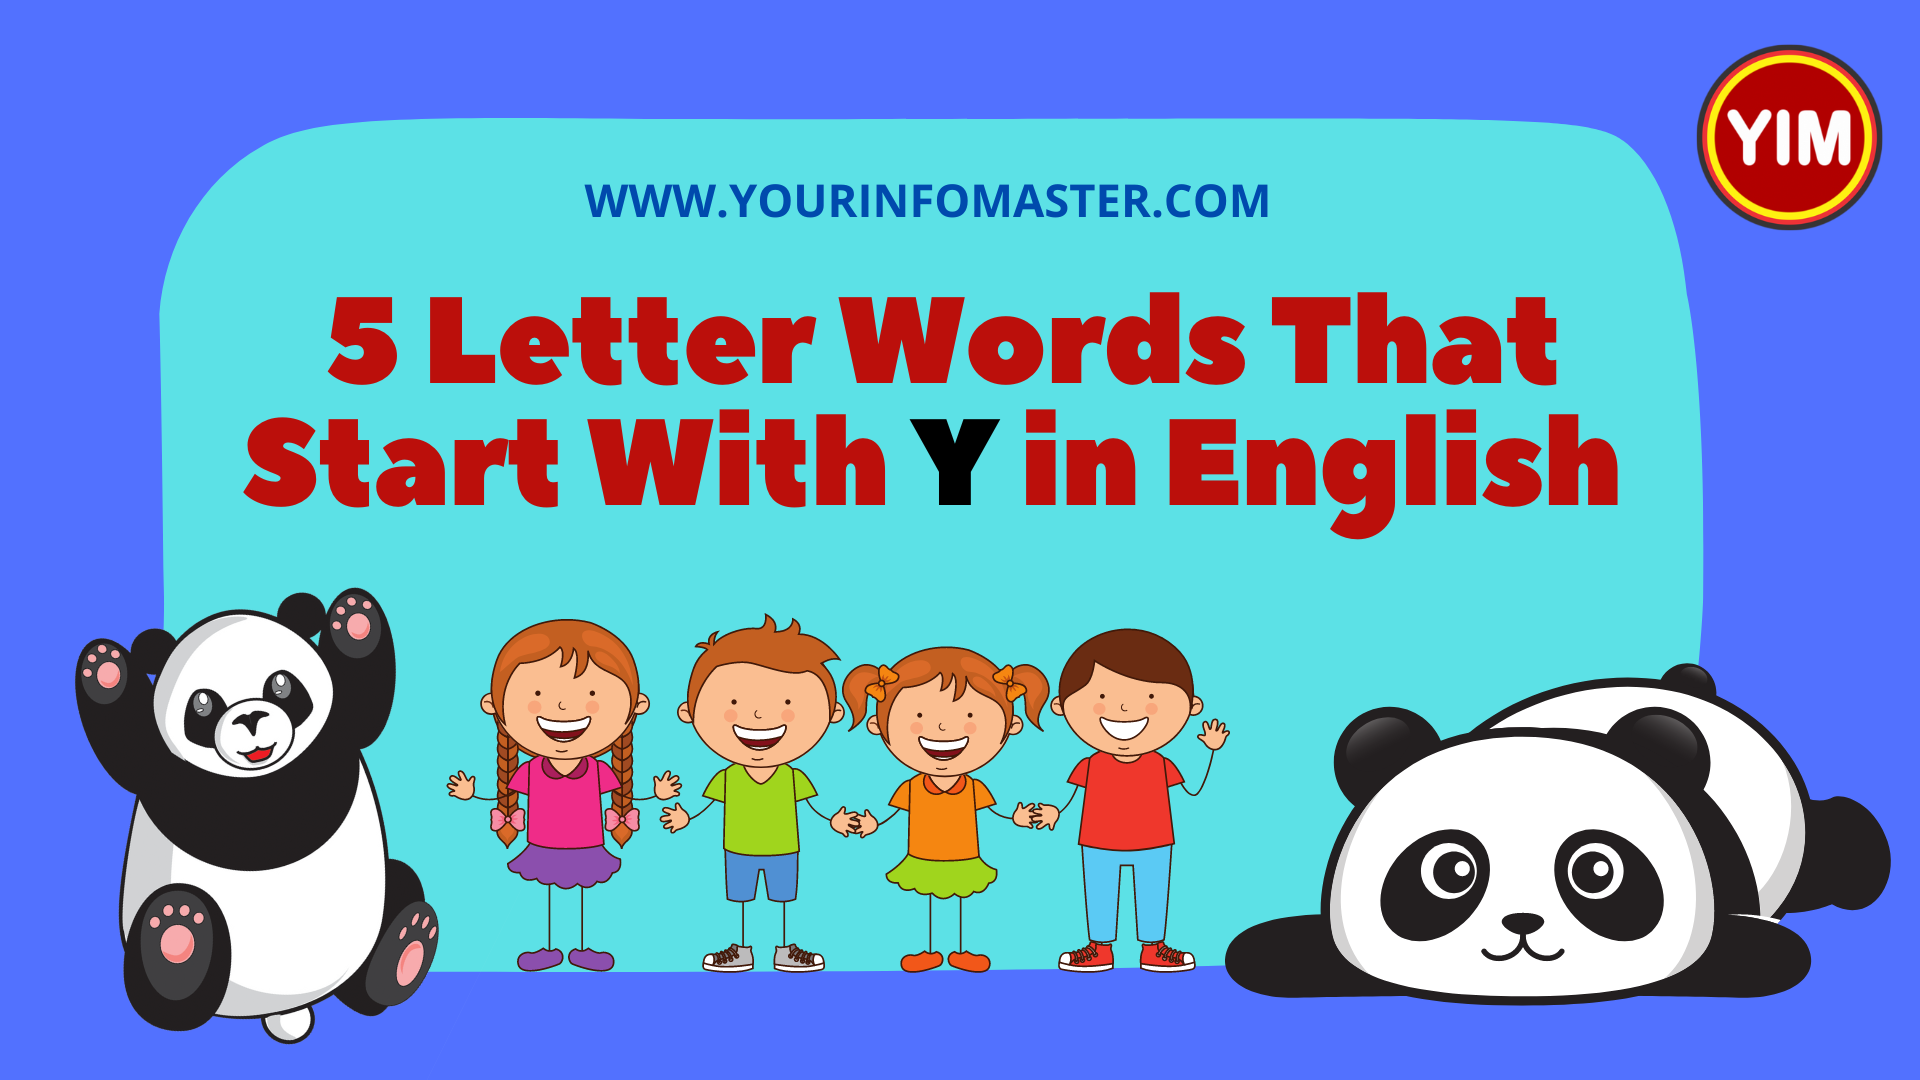 5 letter words, 5 Letter Words Starting With Y, 5 letter words that start with Y, 5 Letter Words With Y, 5 Letter Y Words, English, English Grammar, English Vocabulary, English Words, List of 5 Letter Words, Vocabulary, Words That Start with Y, Y words